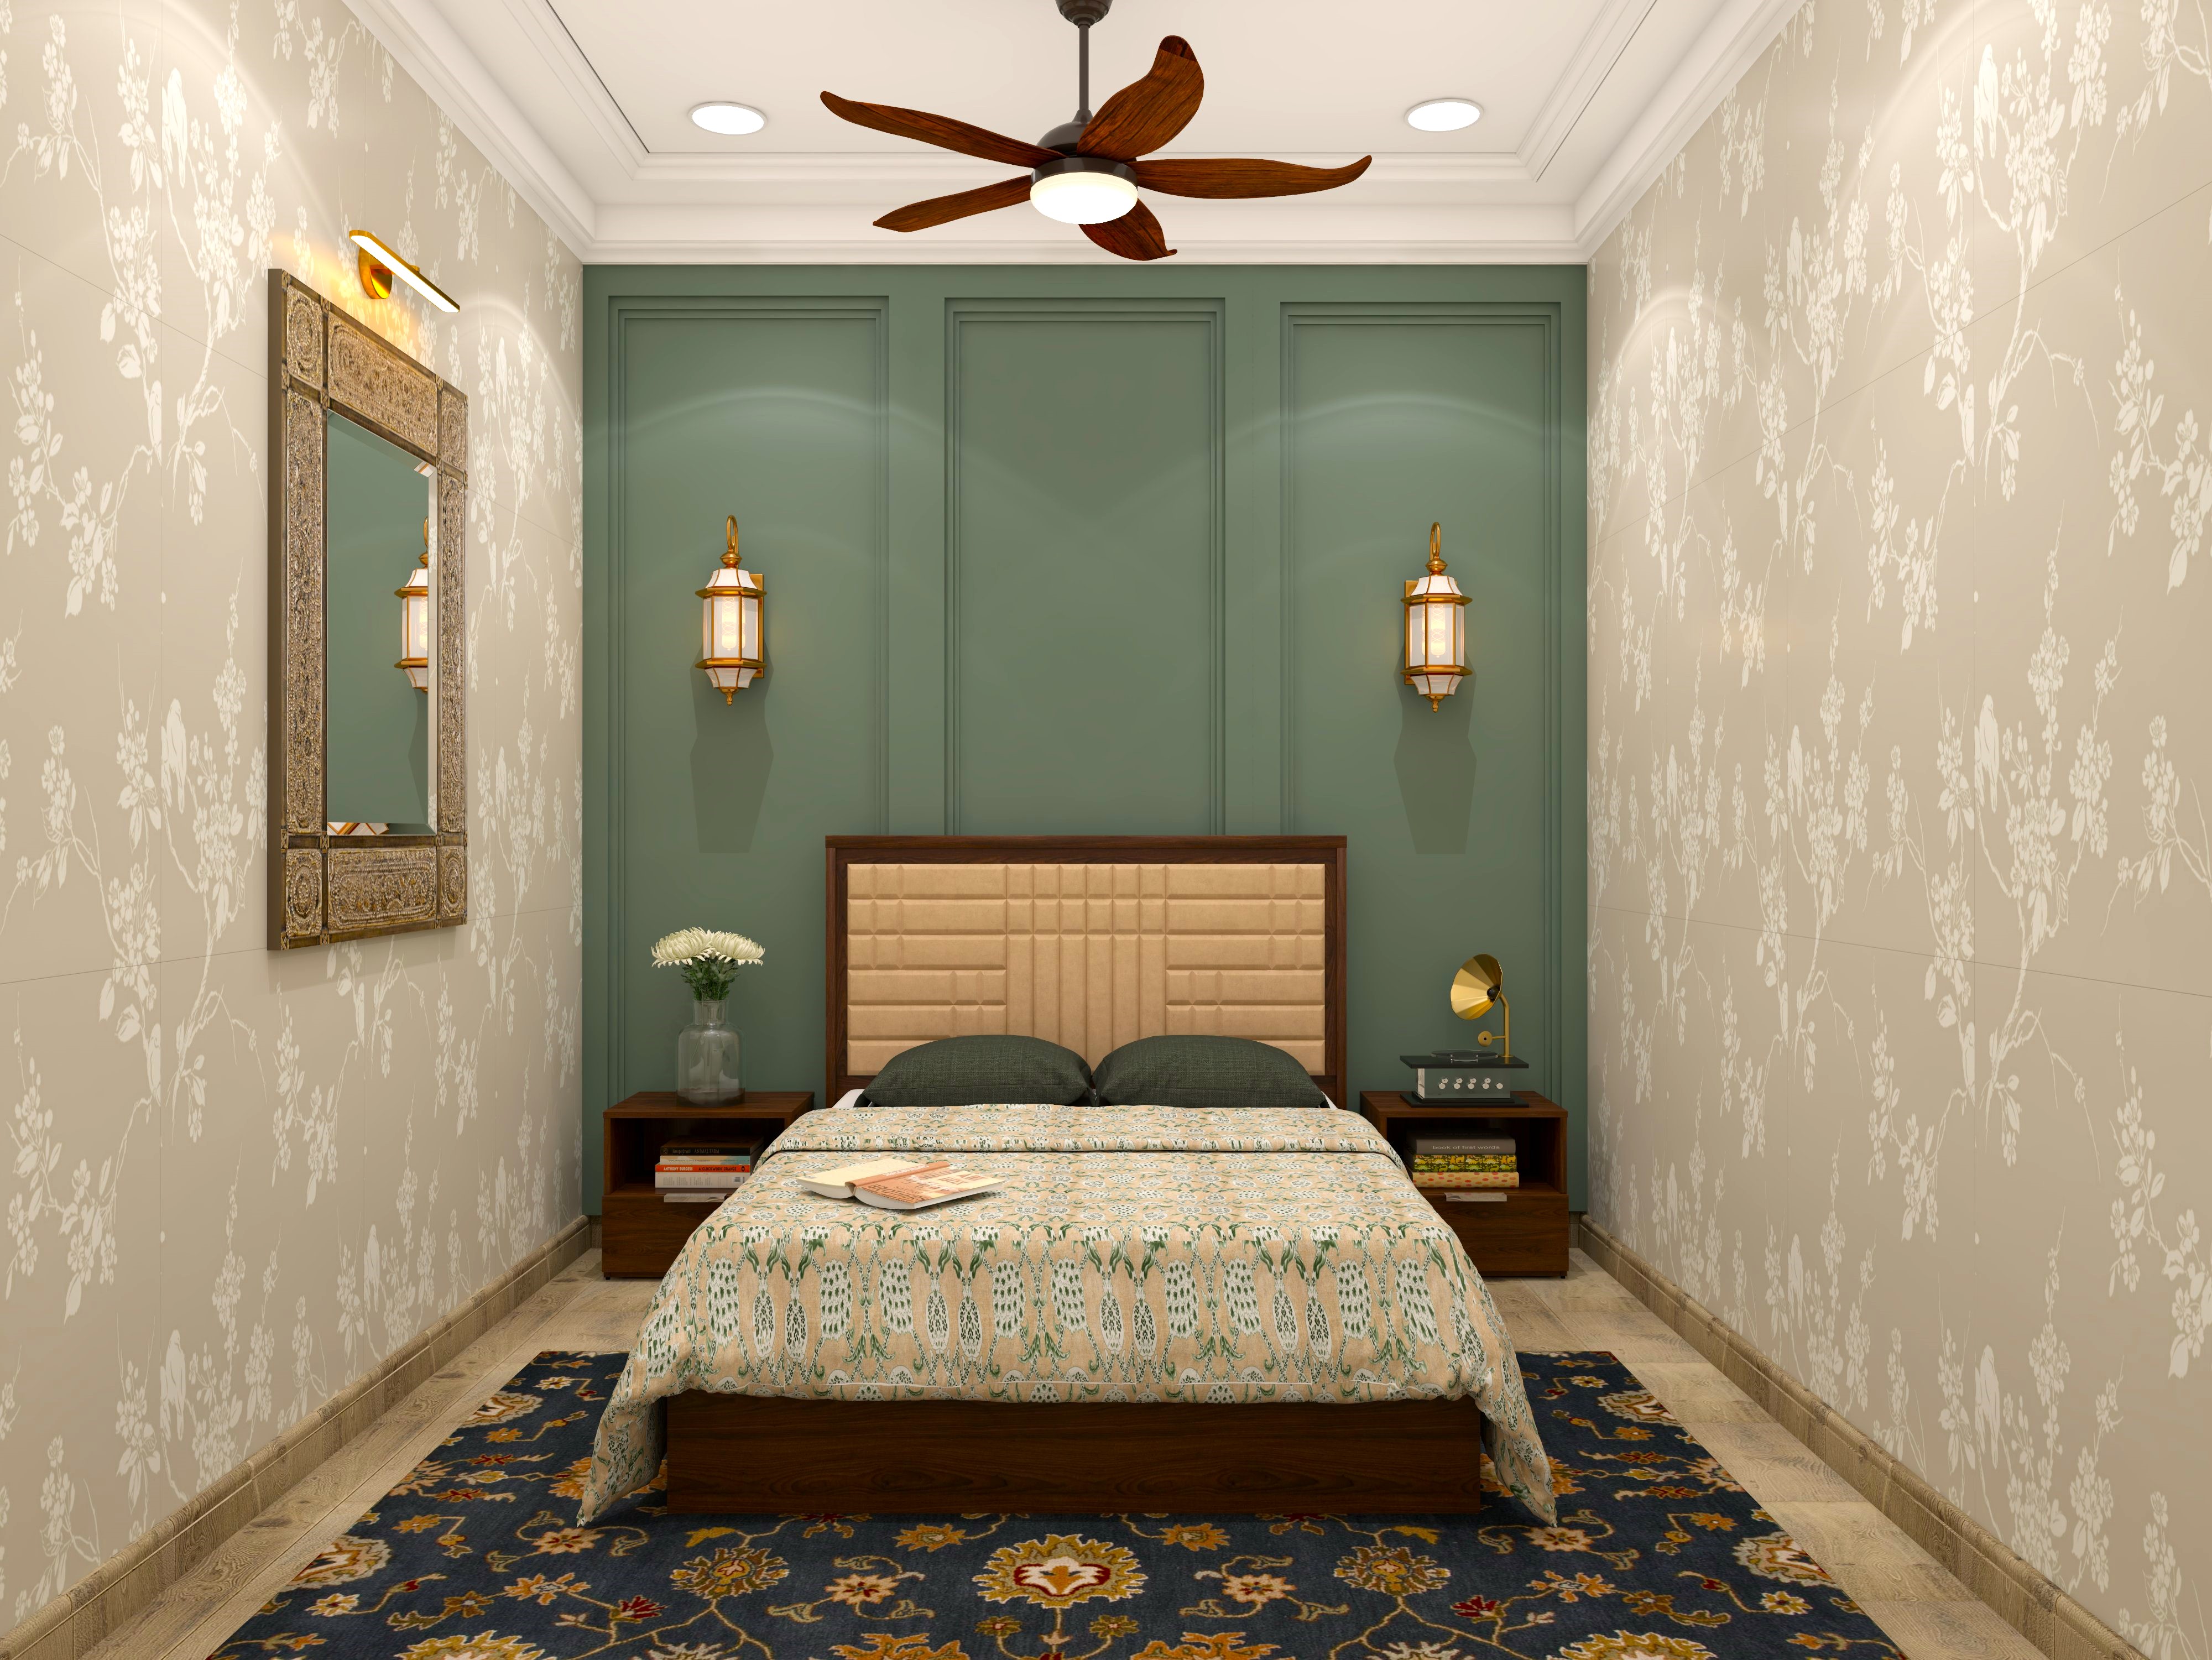 Guest bedroom walls with green mouldings and beige floral wallpaper-Beautiful Homes